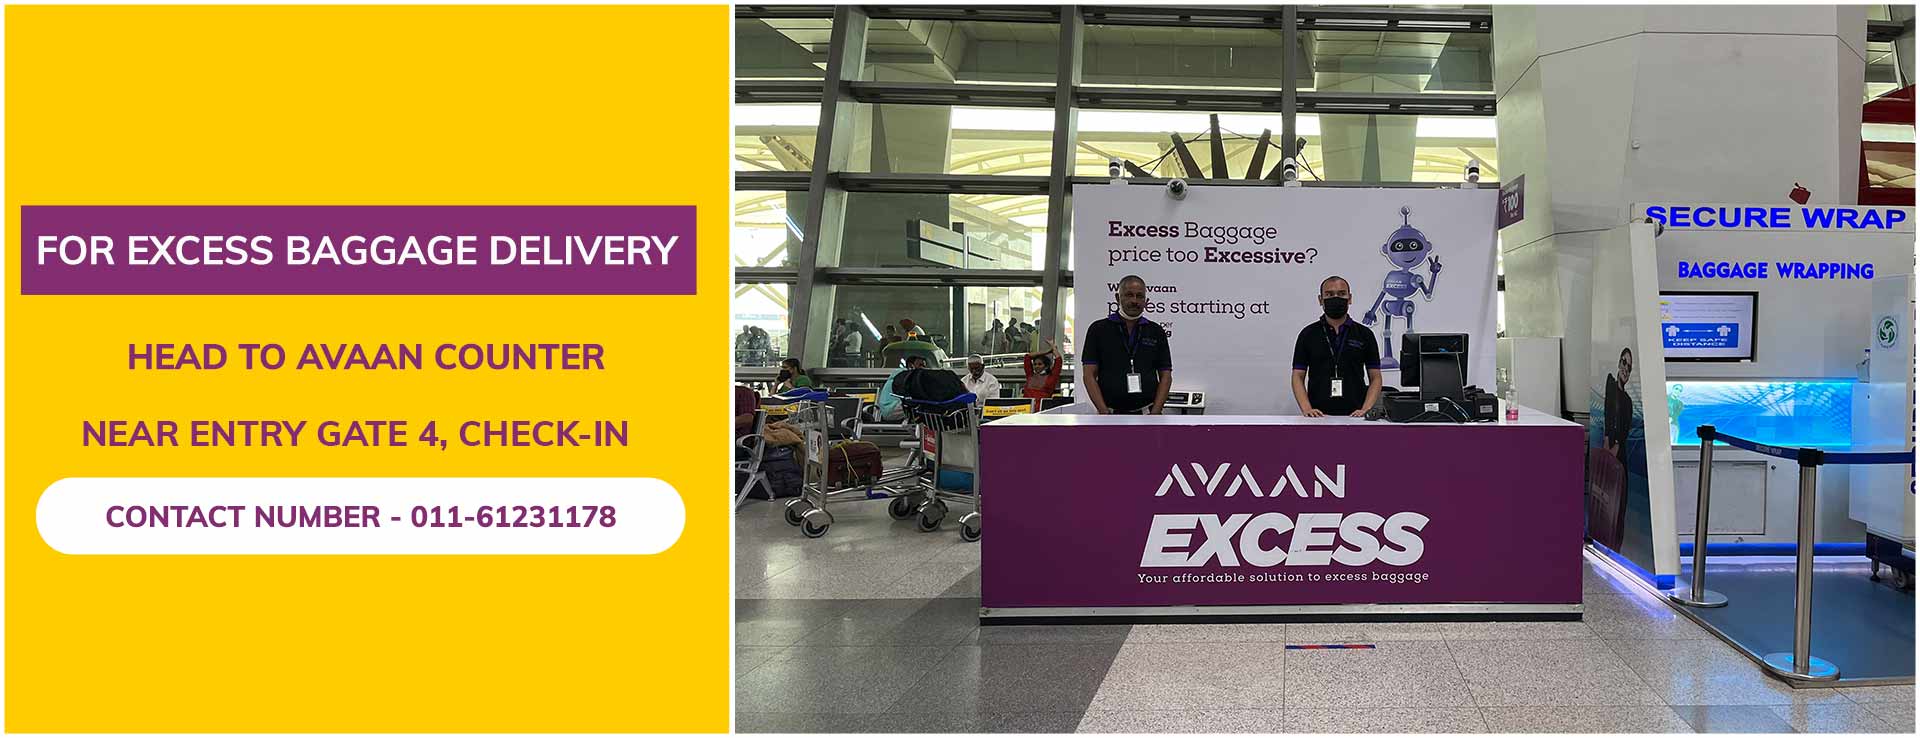  Delhi Airport's hassle-free and pocket friendly Excess Baggage Service - Avaan!